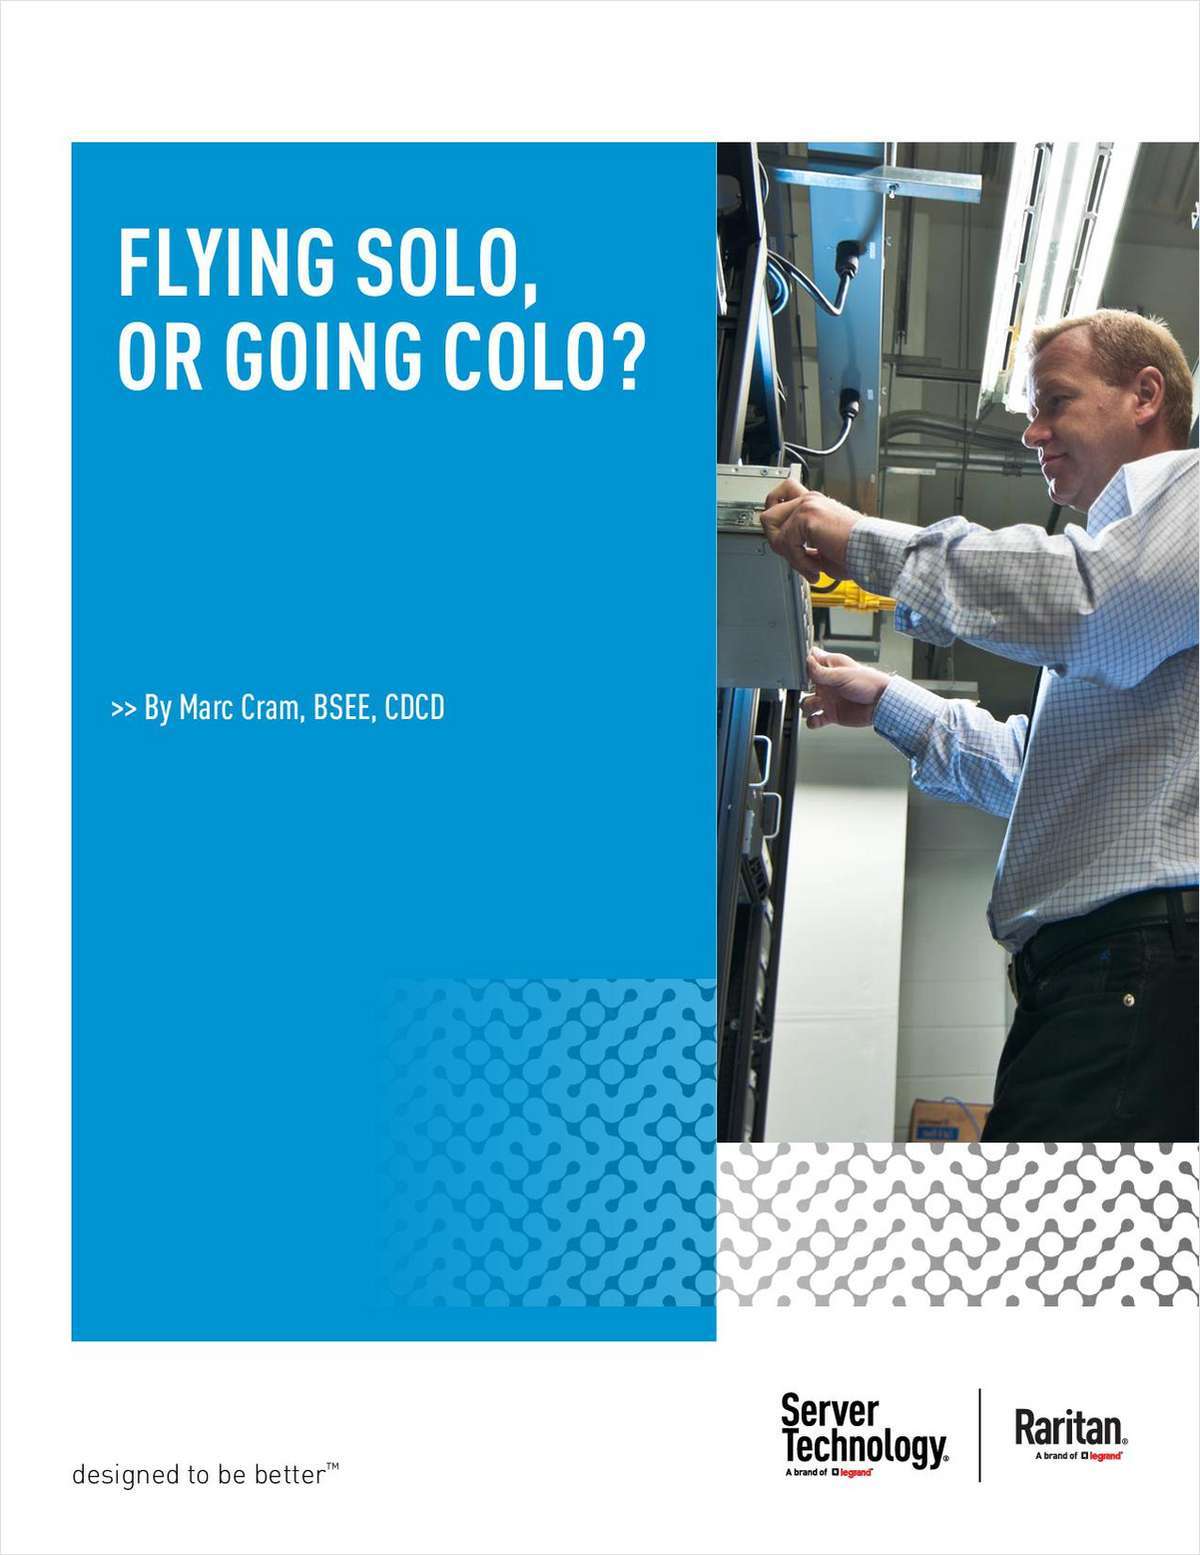 Flying Solo or going Colo